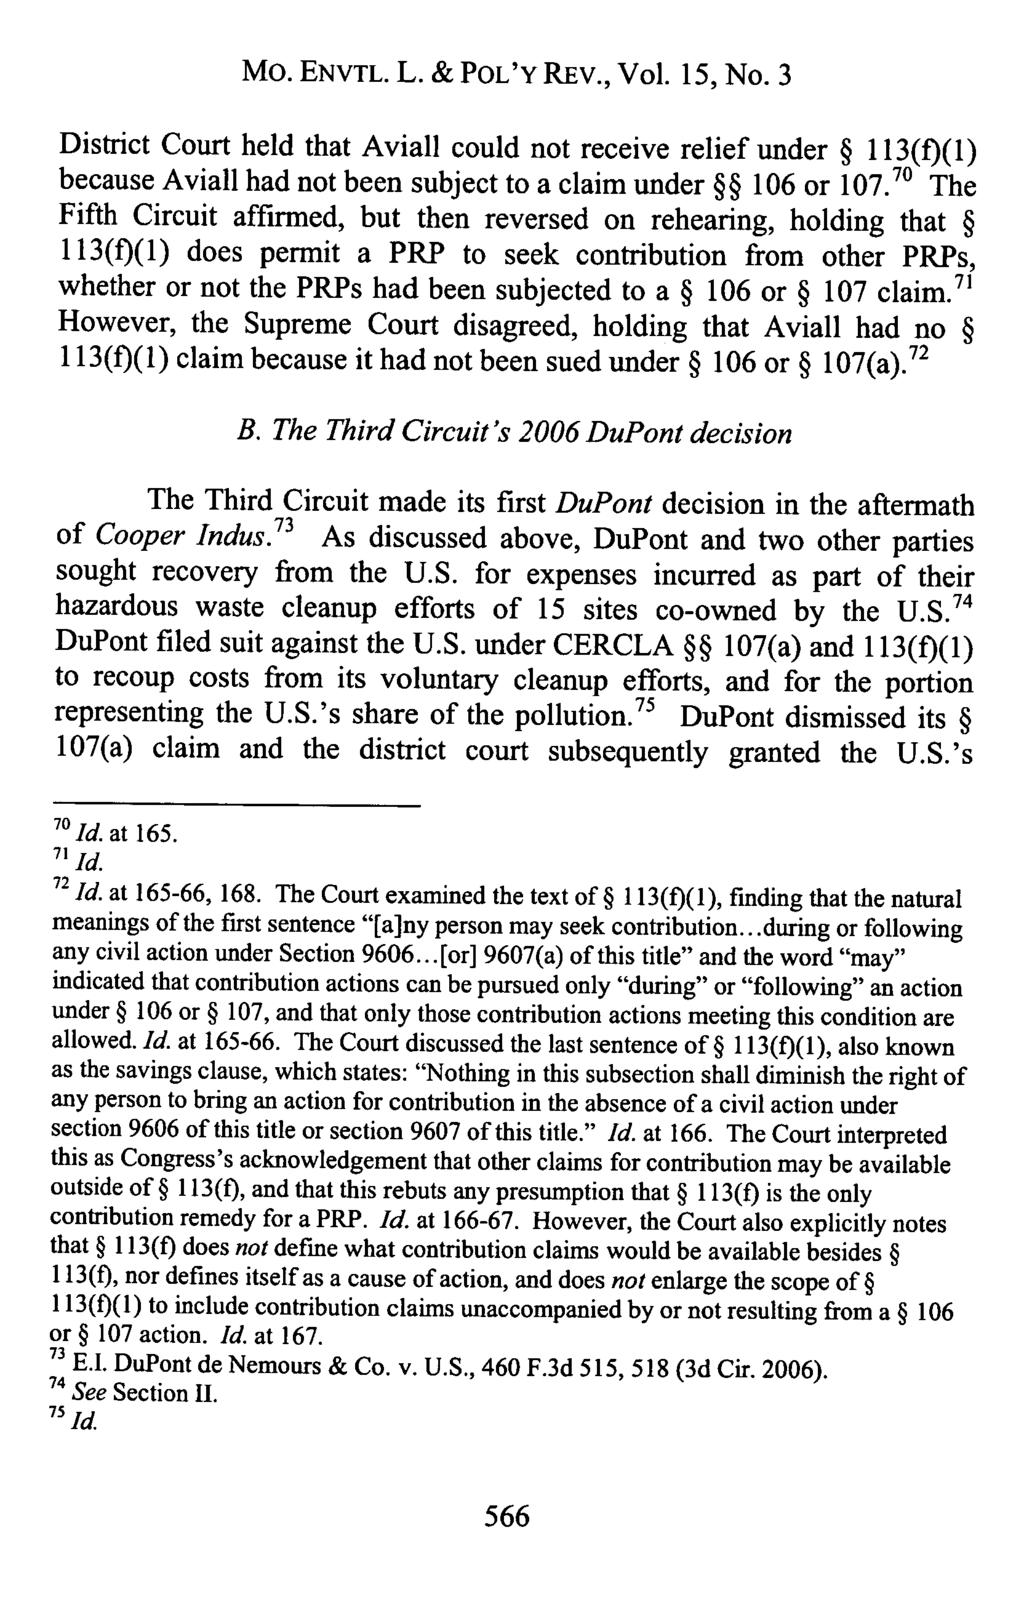 Mo. ENVTL. L. & POL'Y REv., Vol. 15, No. 3 District Court held that Aviall could not receive relief under 113(f)(1) because Aviall had not been subject to a claim under 106 or 107.